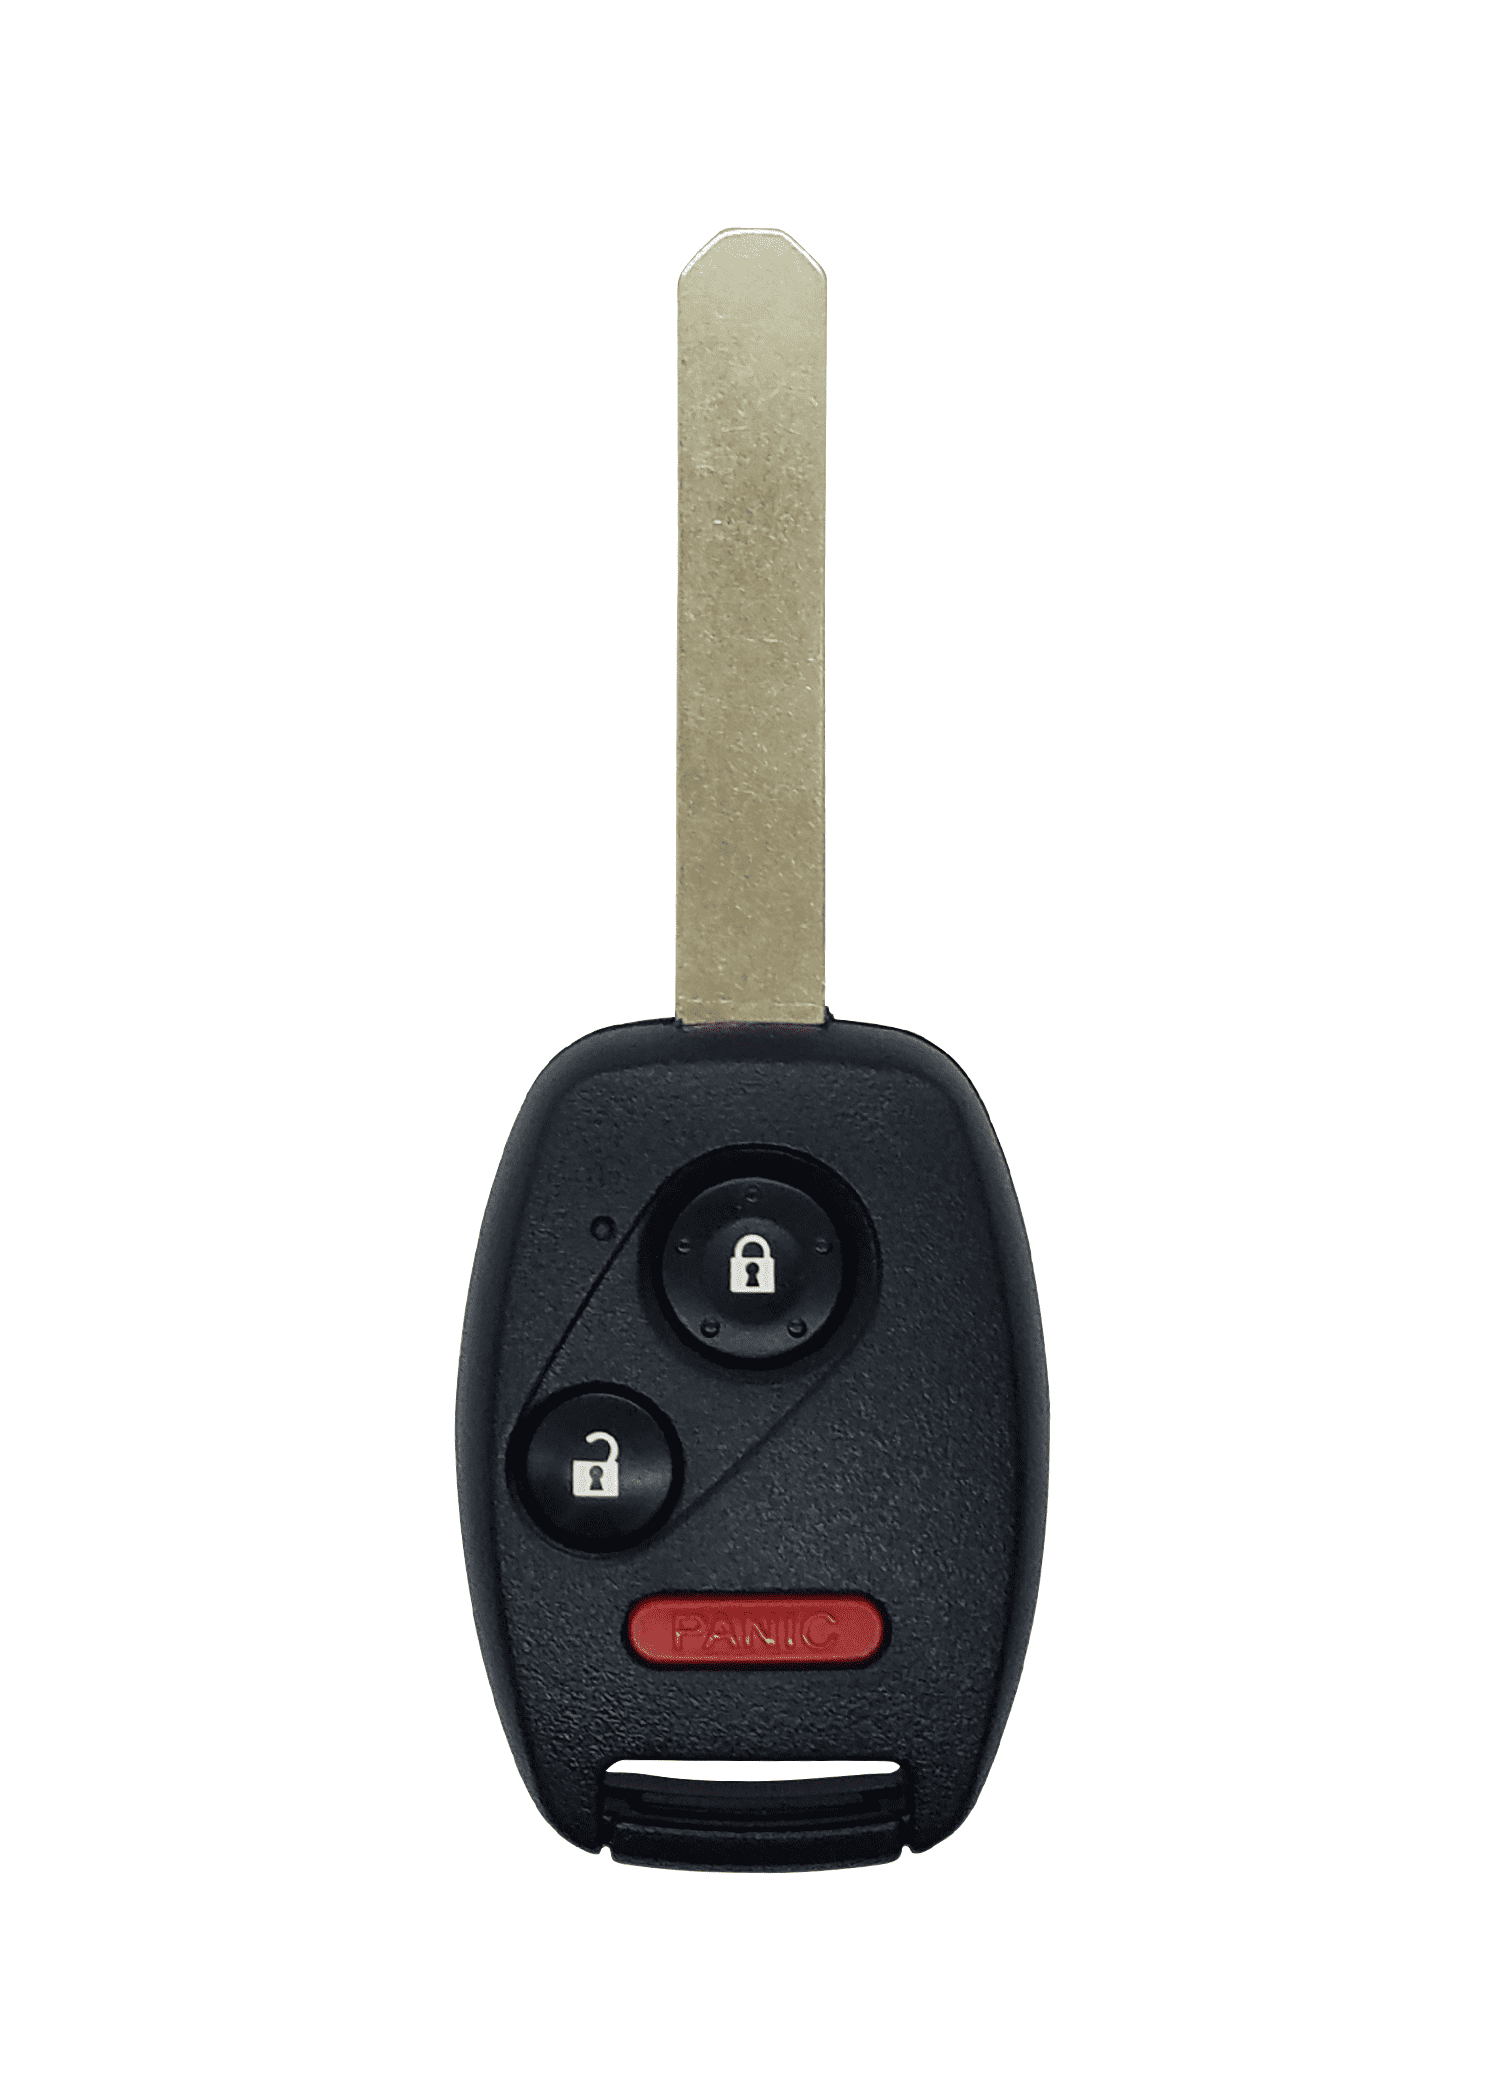 NEW Keyless Entry Key Fob Remote For a 2006 Honda Pilot 3 Buttons 